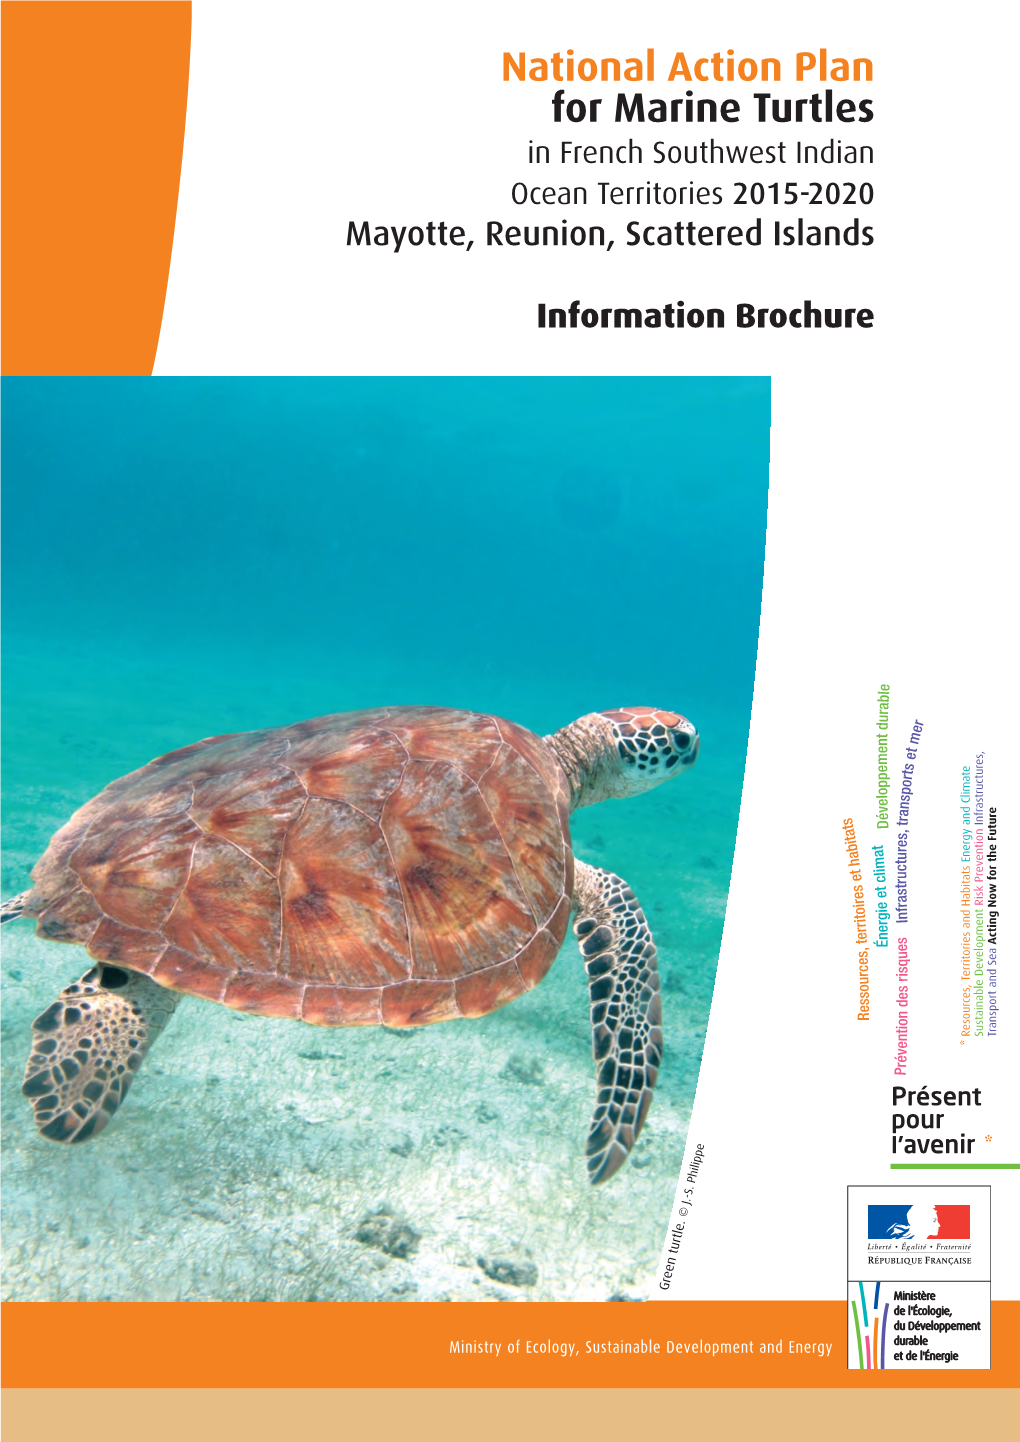 National Action Plan for Marine Turtles in French Southwest Indian Ocean Territories 2015-2020 Mayotte, Reunion, Scattered Islands